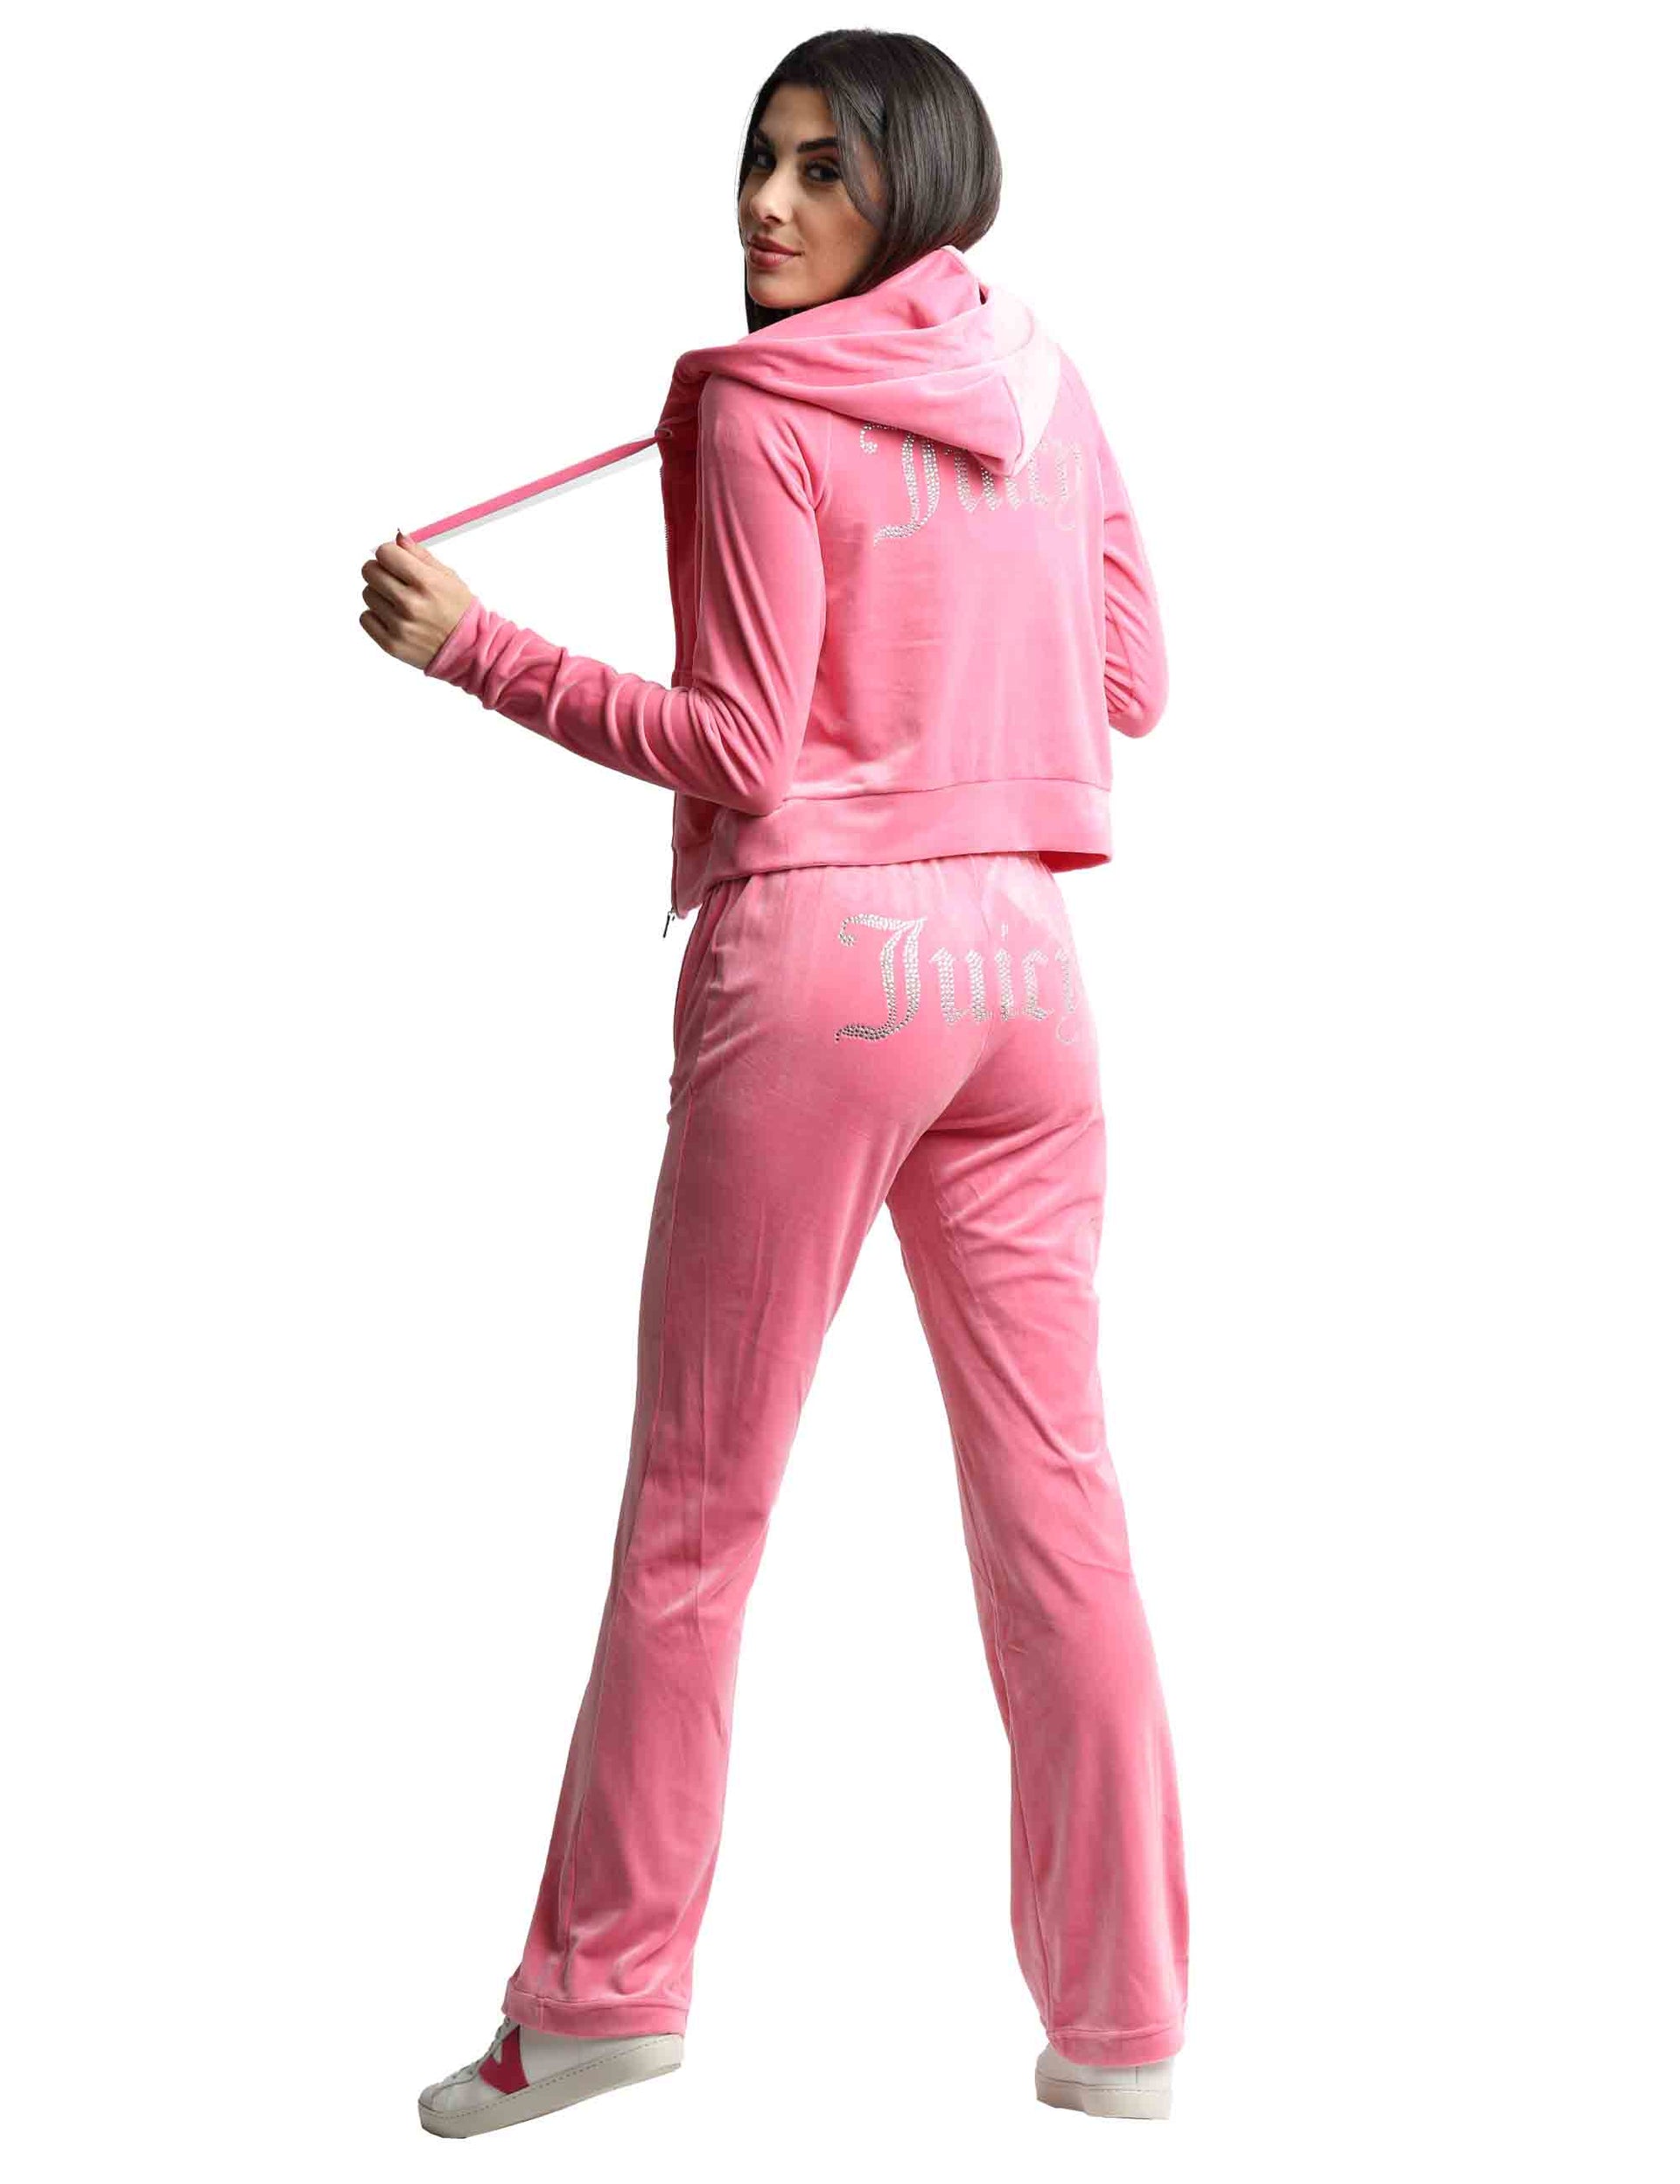 Tina women's tracksuit trousers in pink fabric with rhinestones